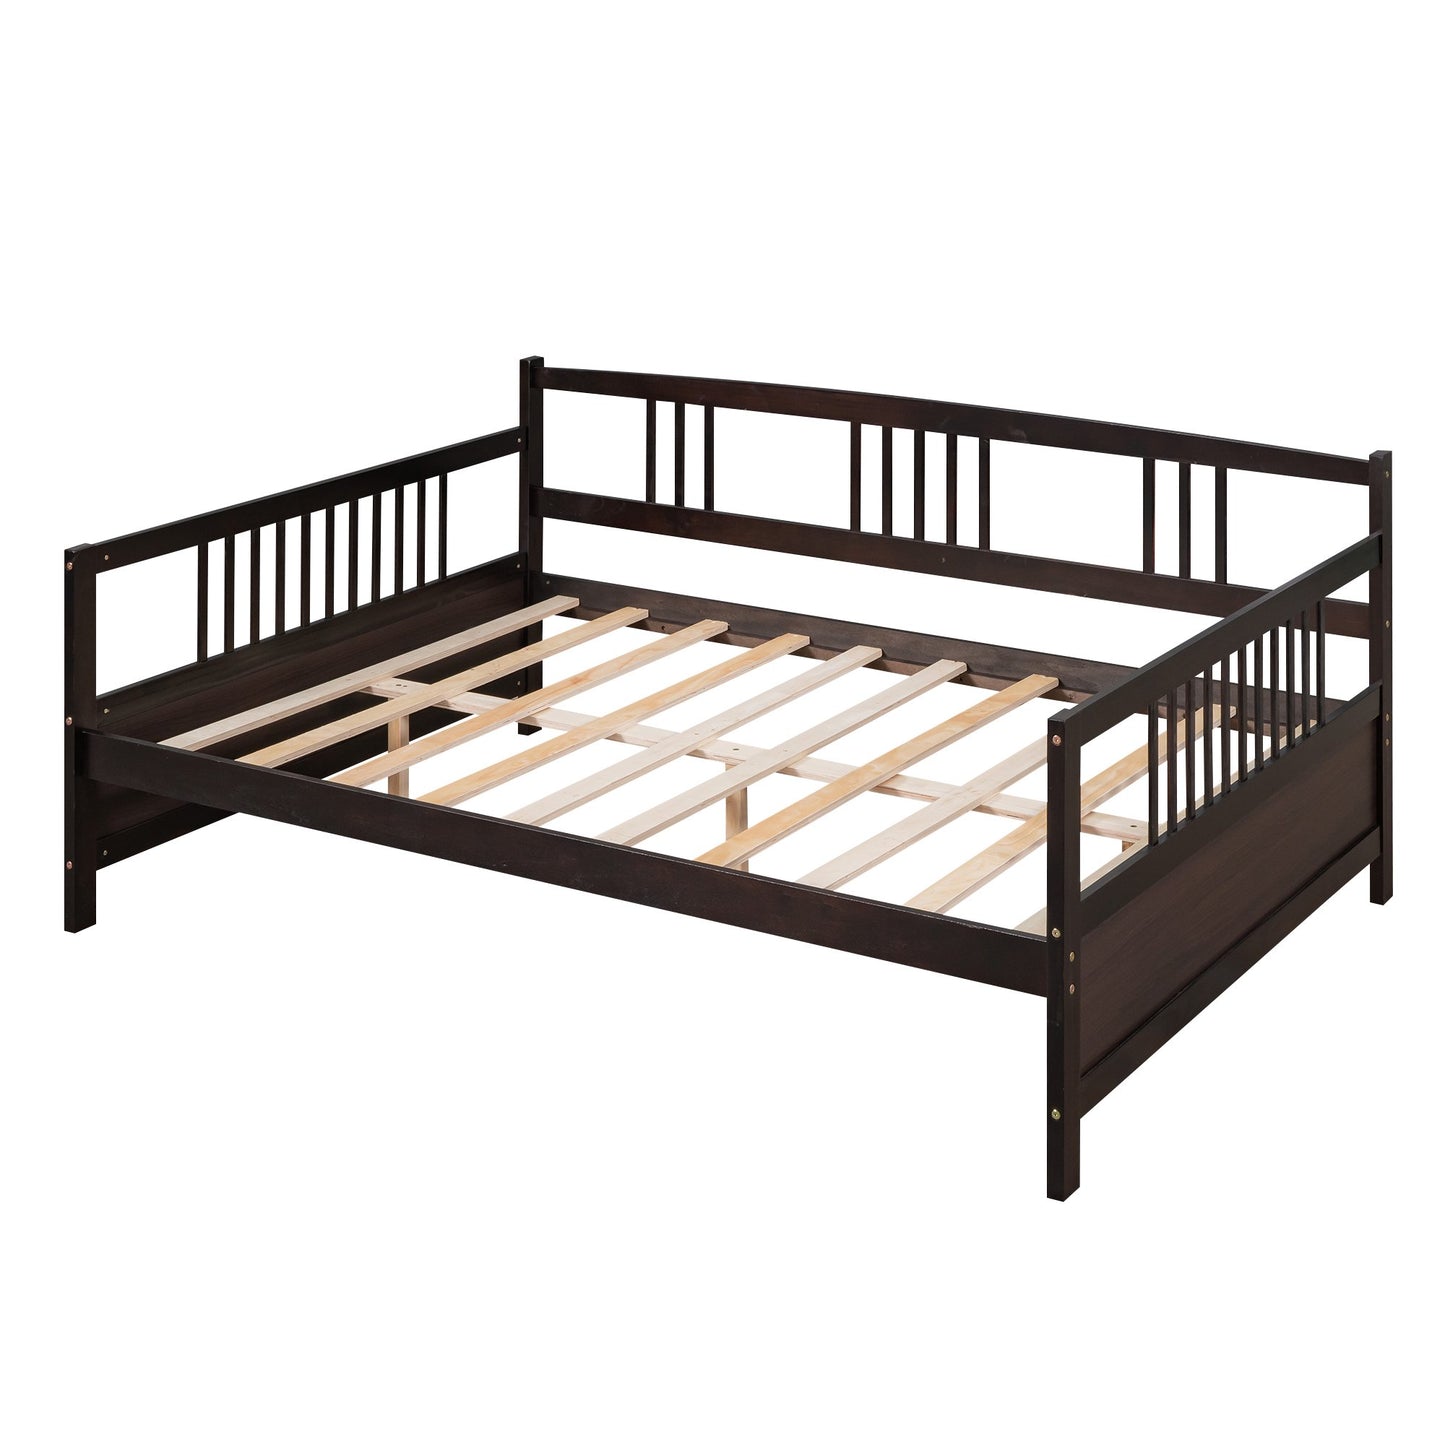 Gewnee Solid Wood Full Size Daybed with Support Legs,Espresso